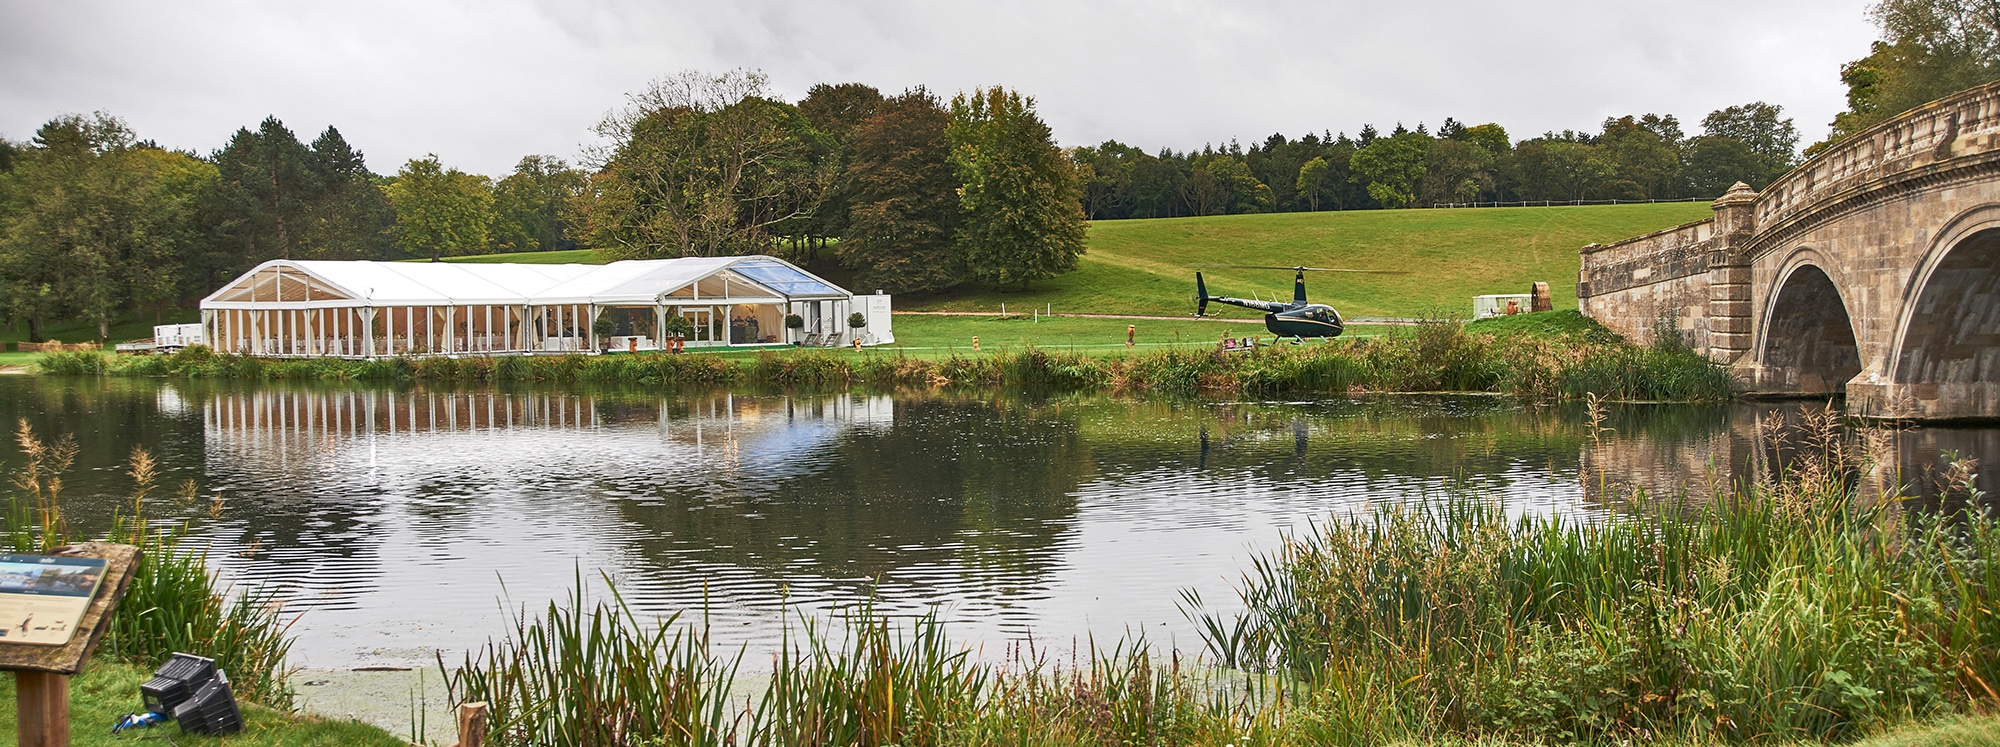 Luxury Wedding Marquee at Blenheim Palace